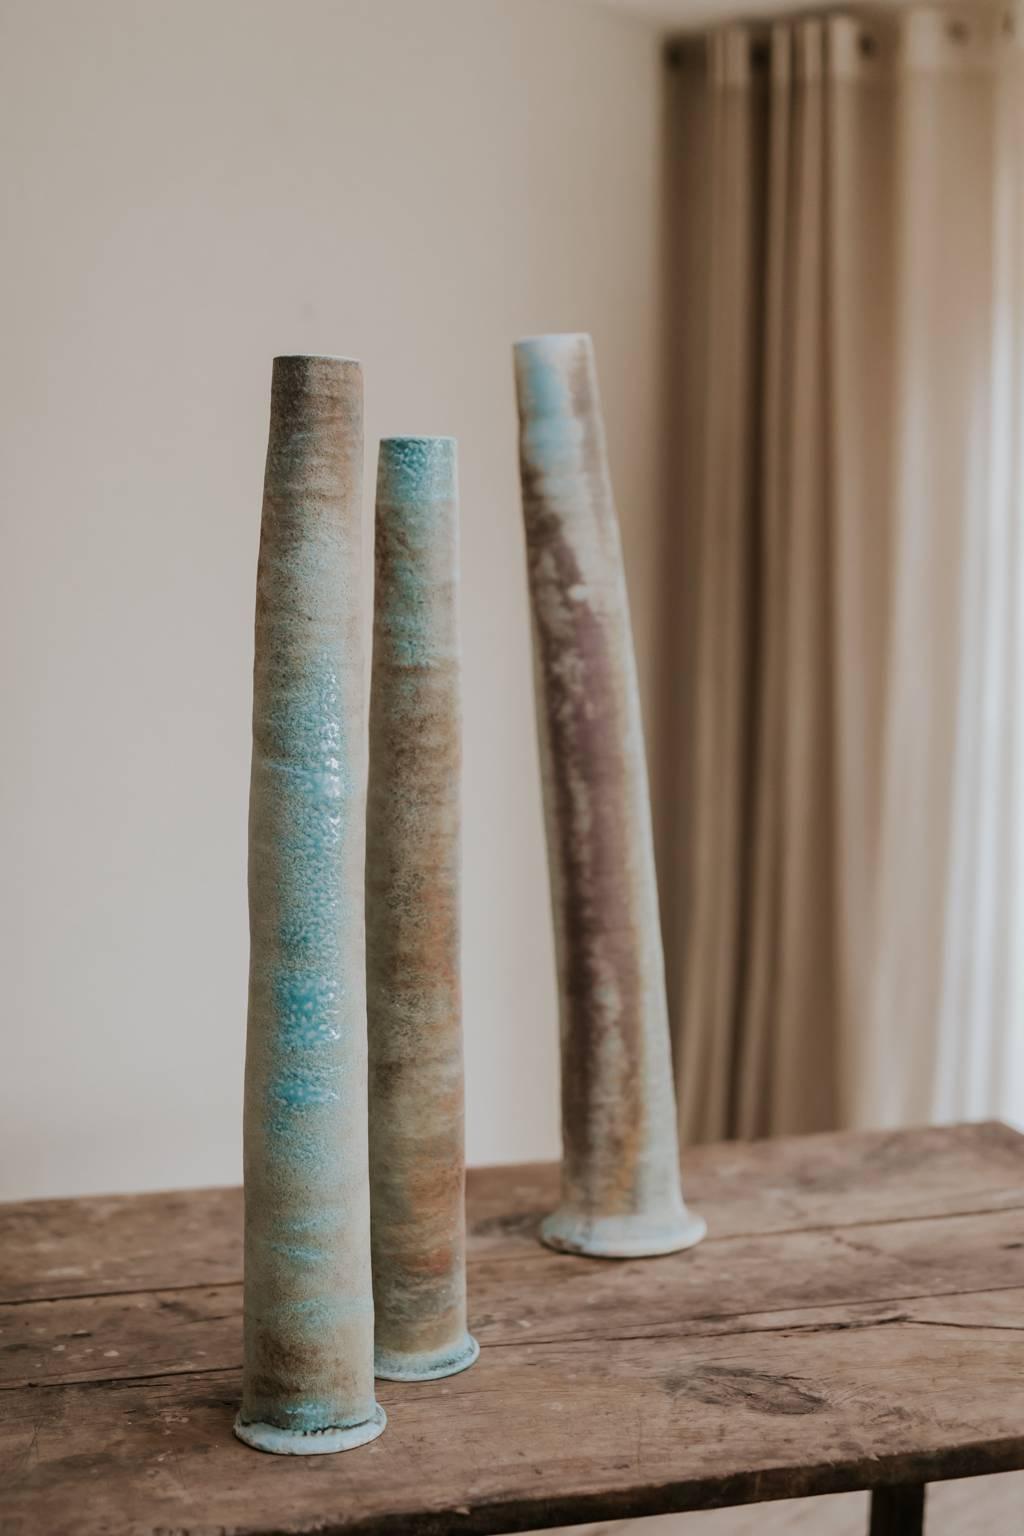 Northern Irish 21st Century Ceramic Vases by Jack Doherty, Contemporary Artist For Sale